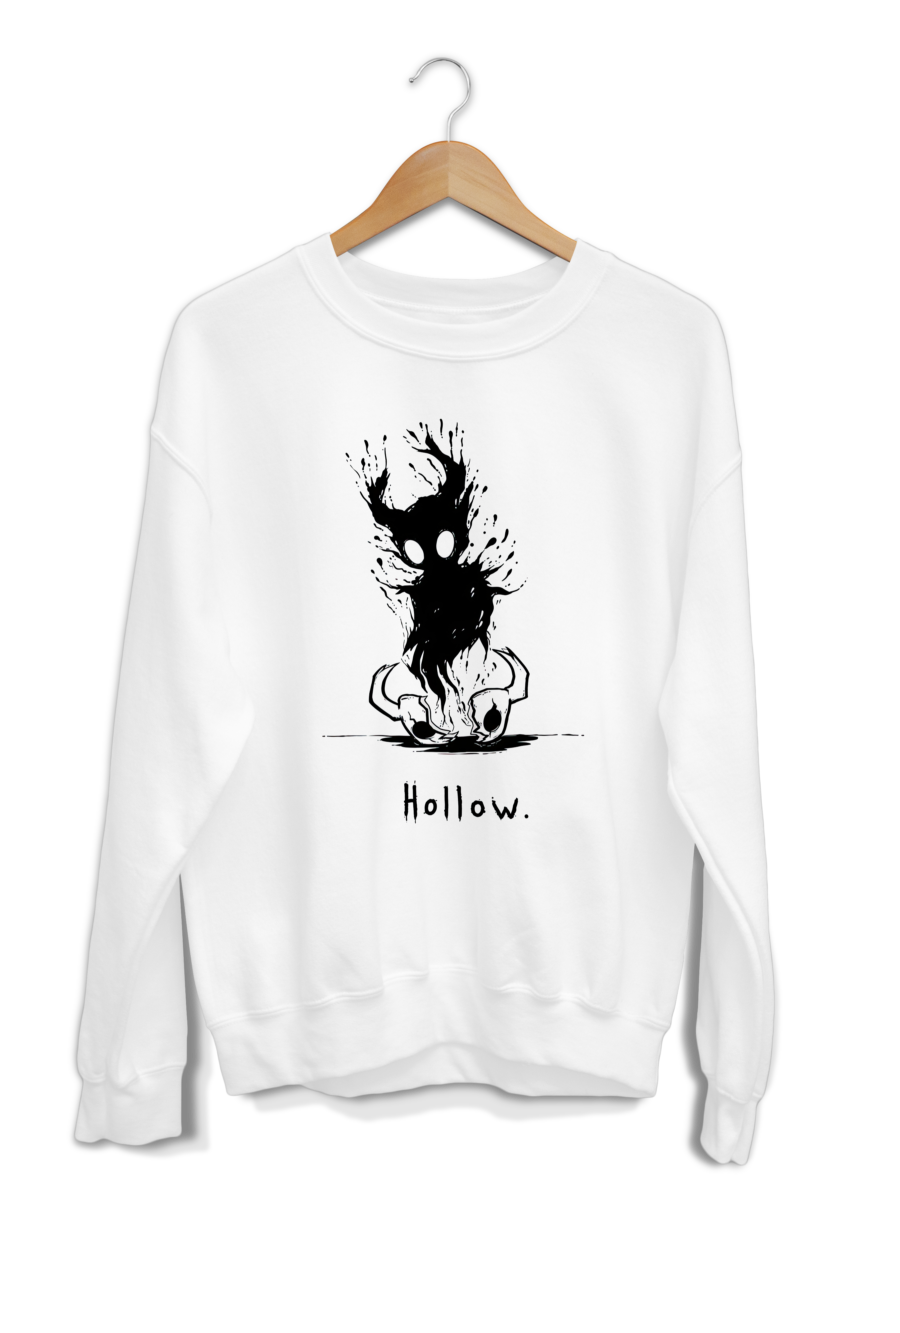 Dark Soul Sweatshirt Graphic Tee for Strength and Resilience